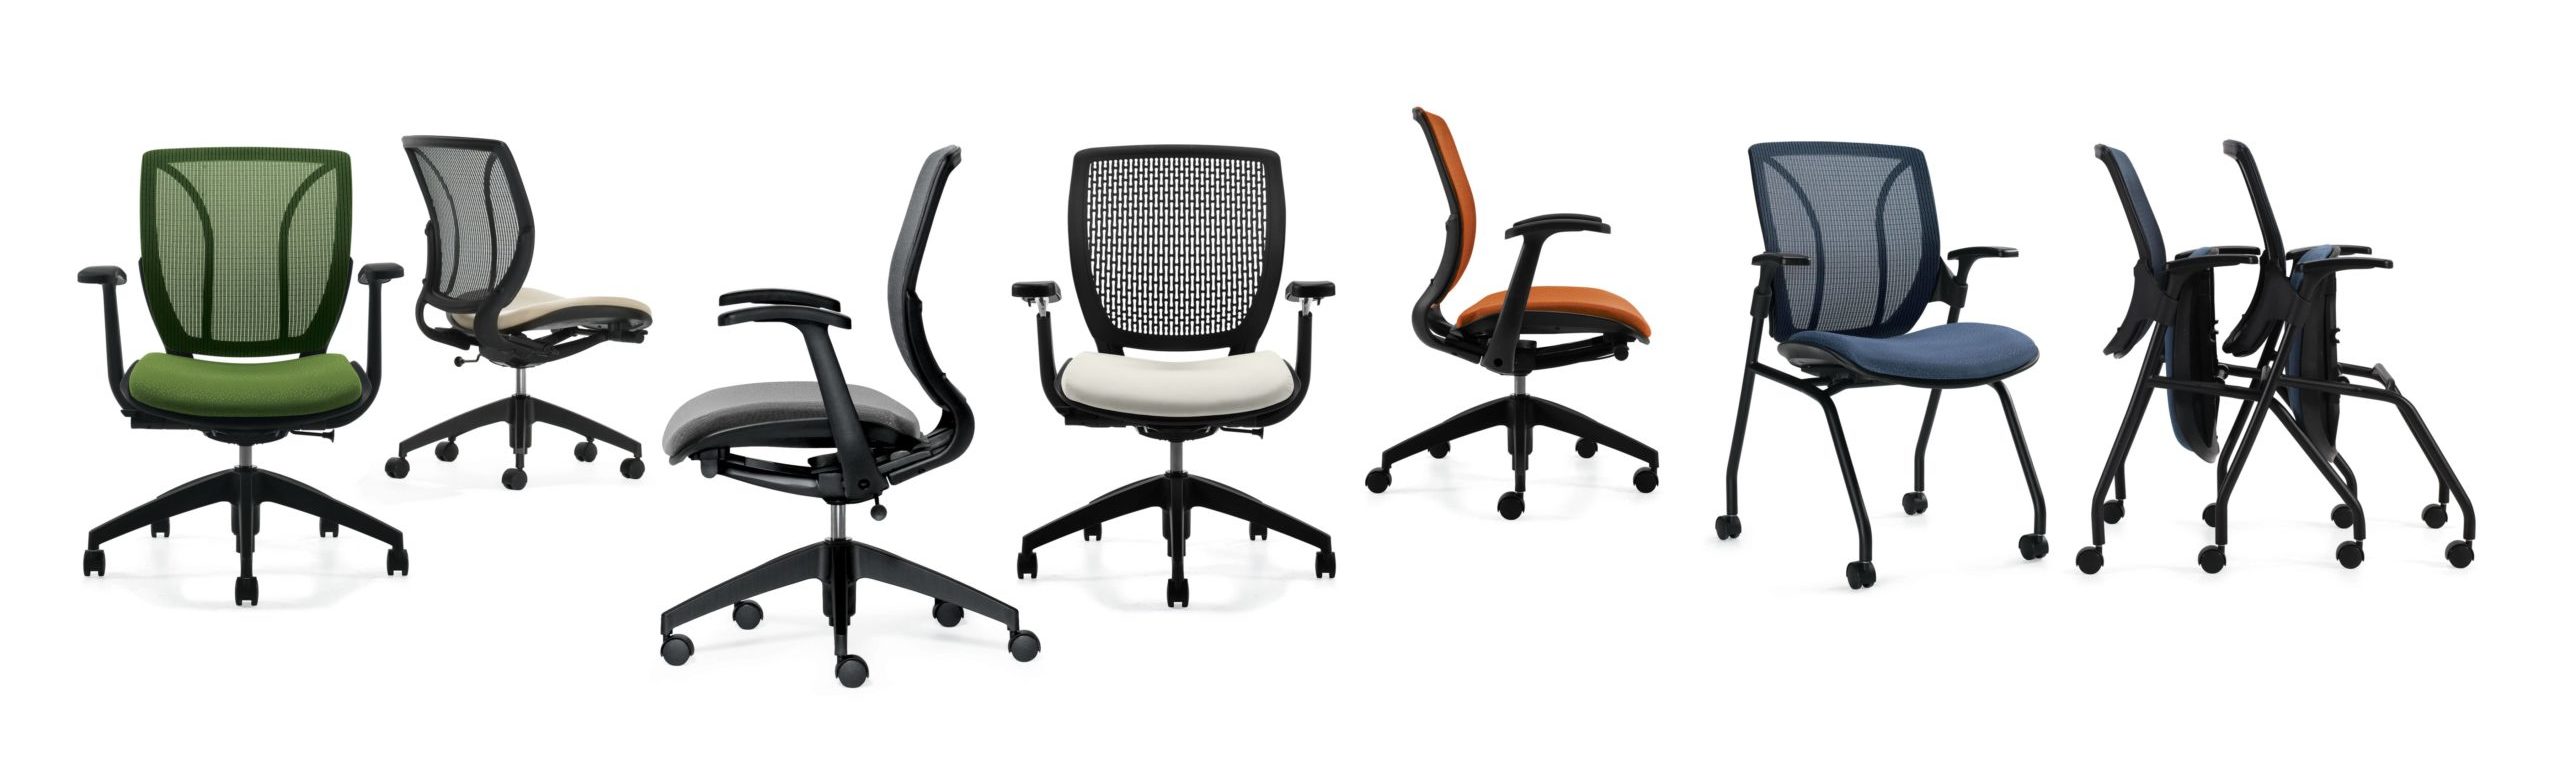 Selection of Office Chairs from Global